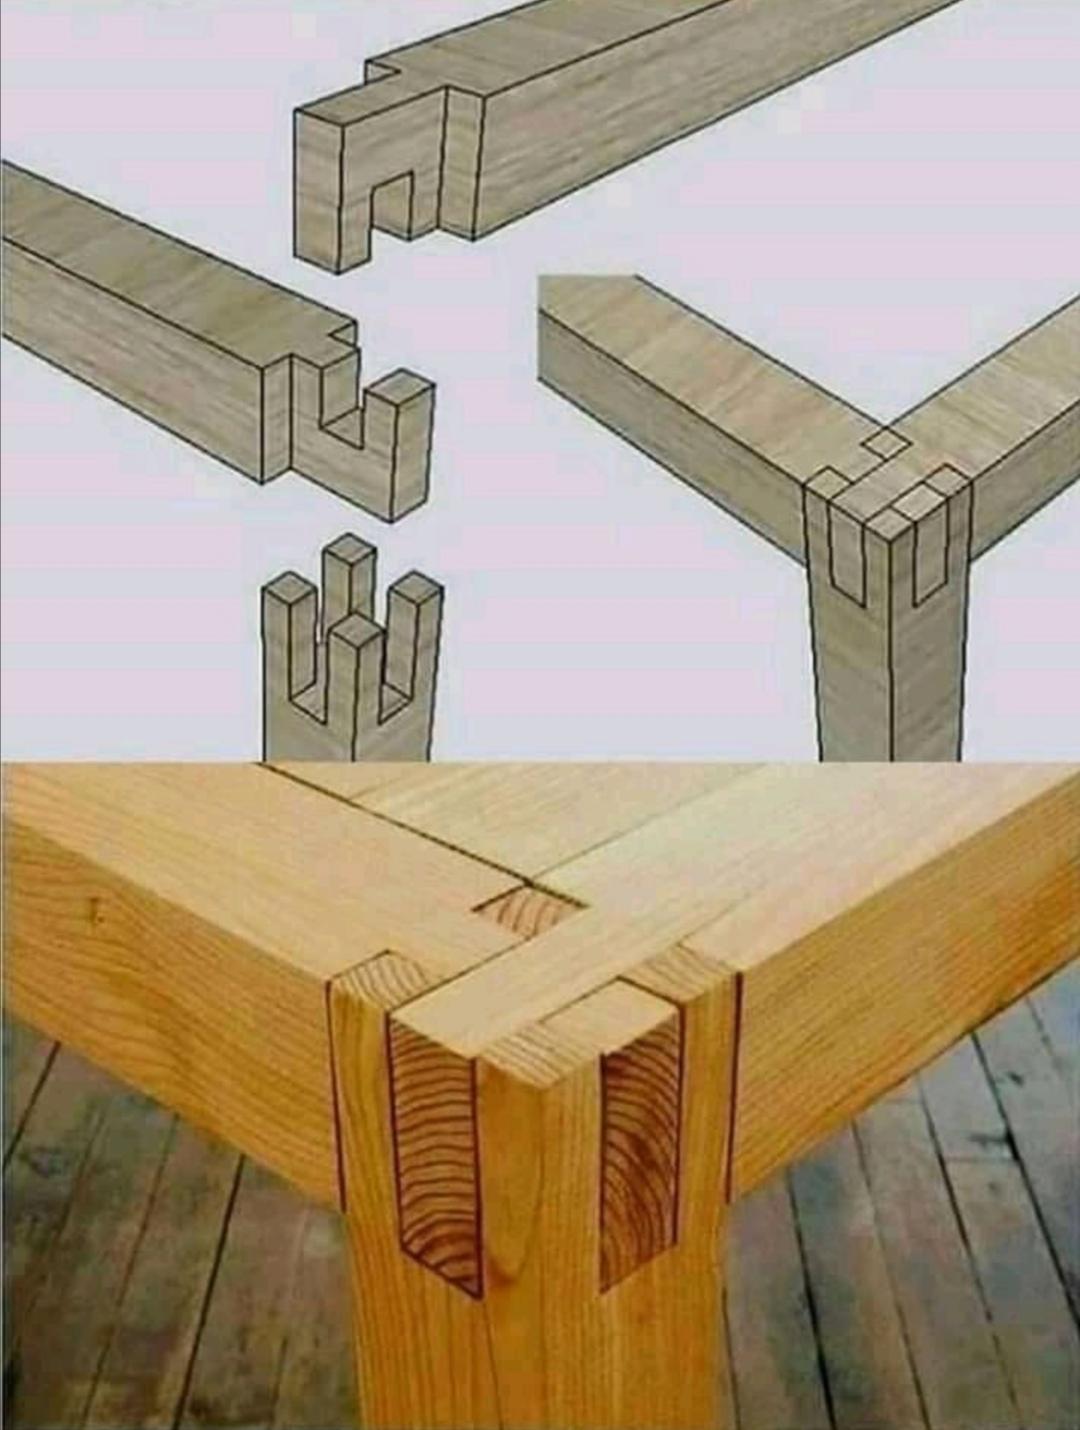 Joinery is beautiful.